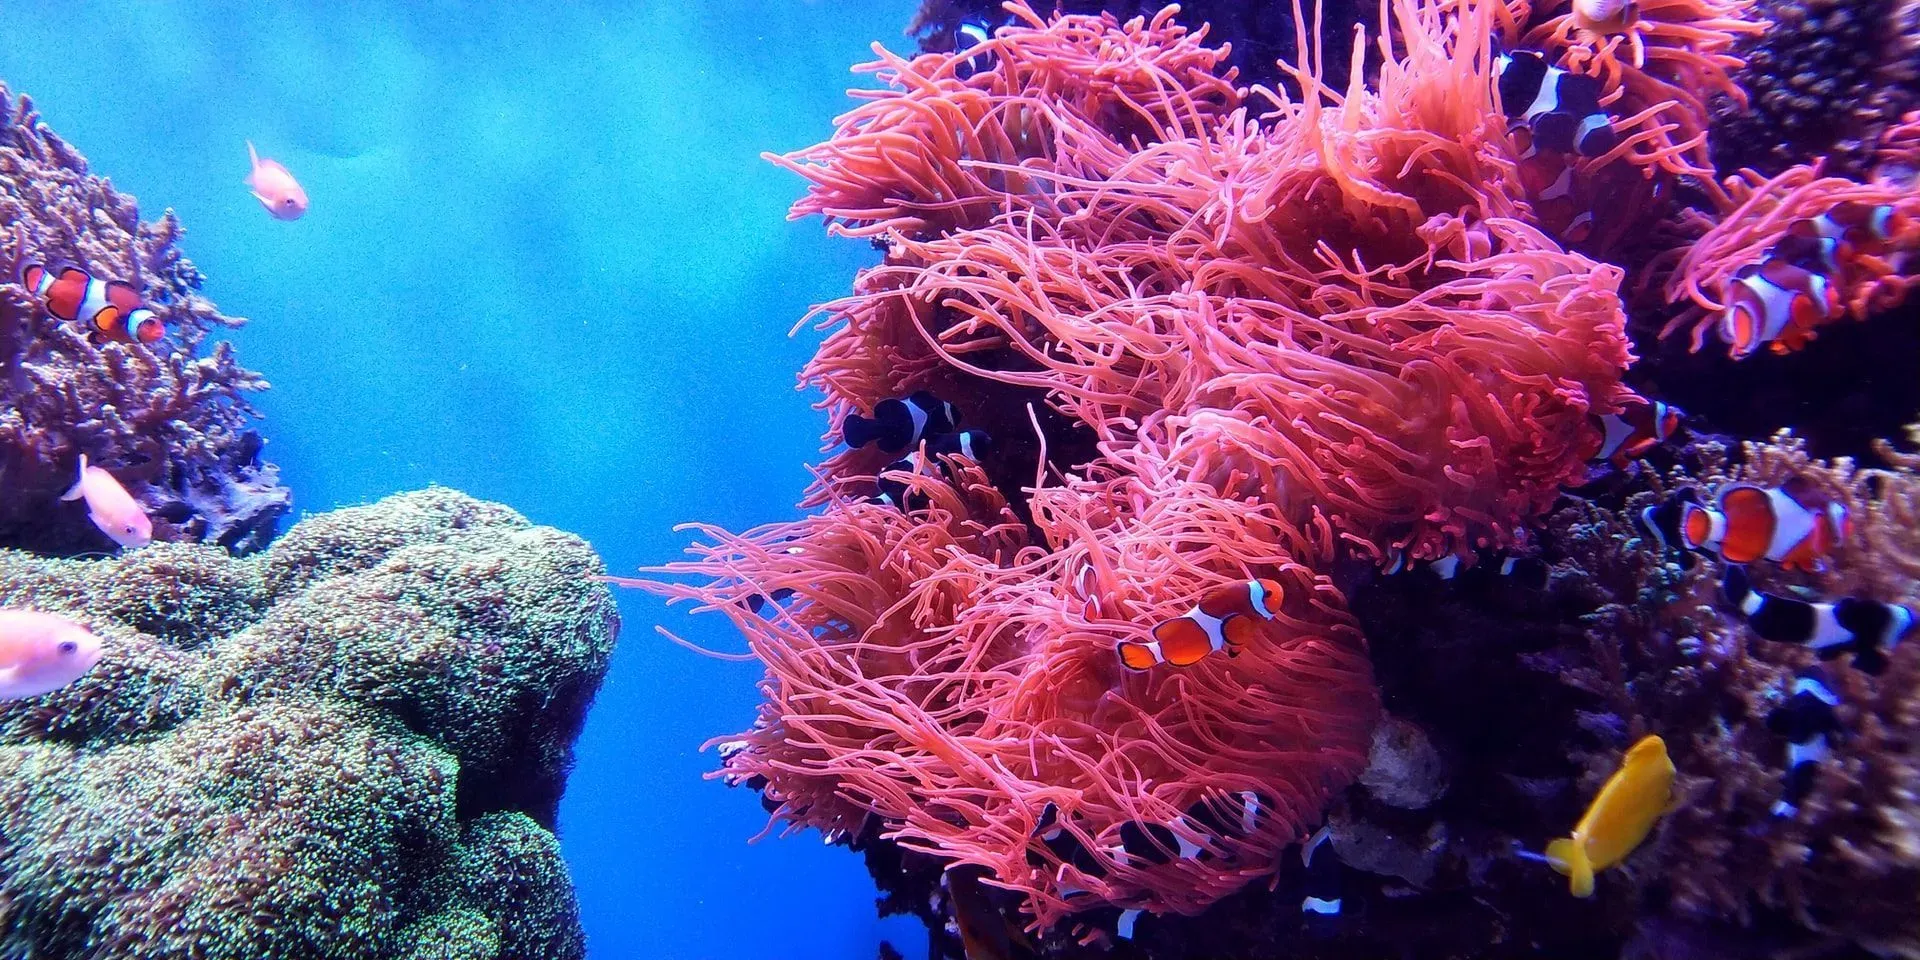 Here are some interesting coral reef ecosystem facts to give you an insight into underwater life.